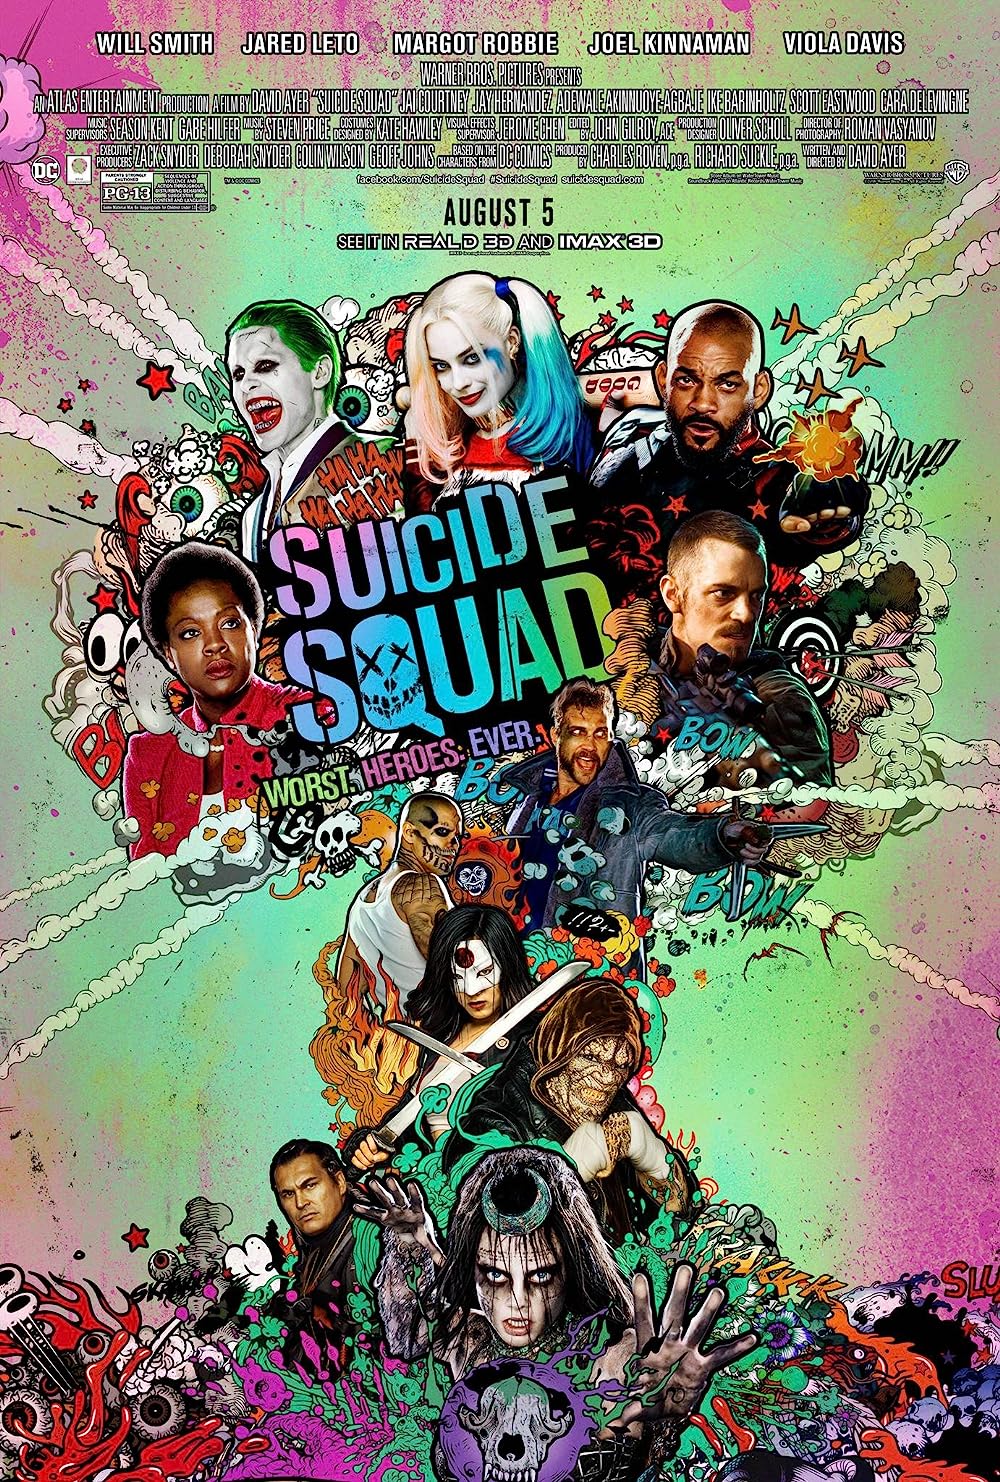 Suicide Squad- DCEU Movies in order